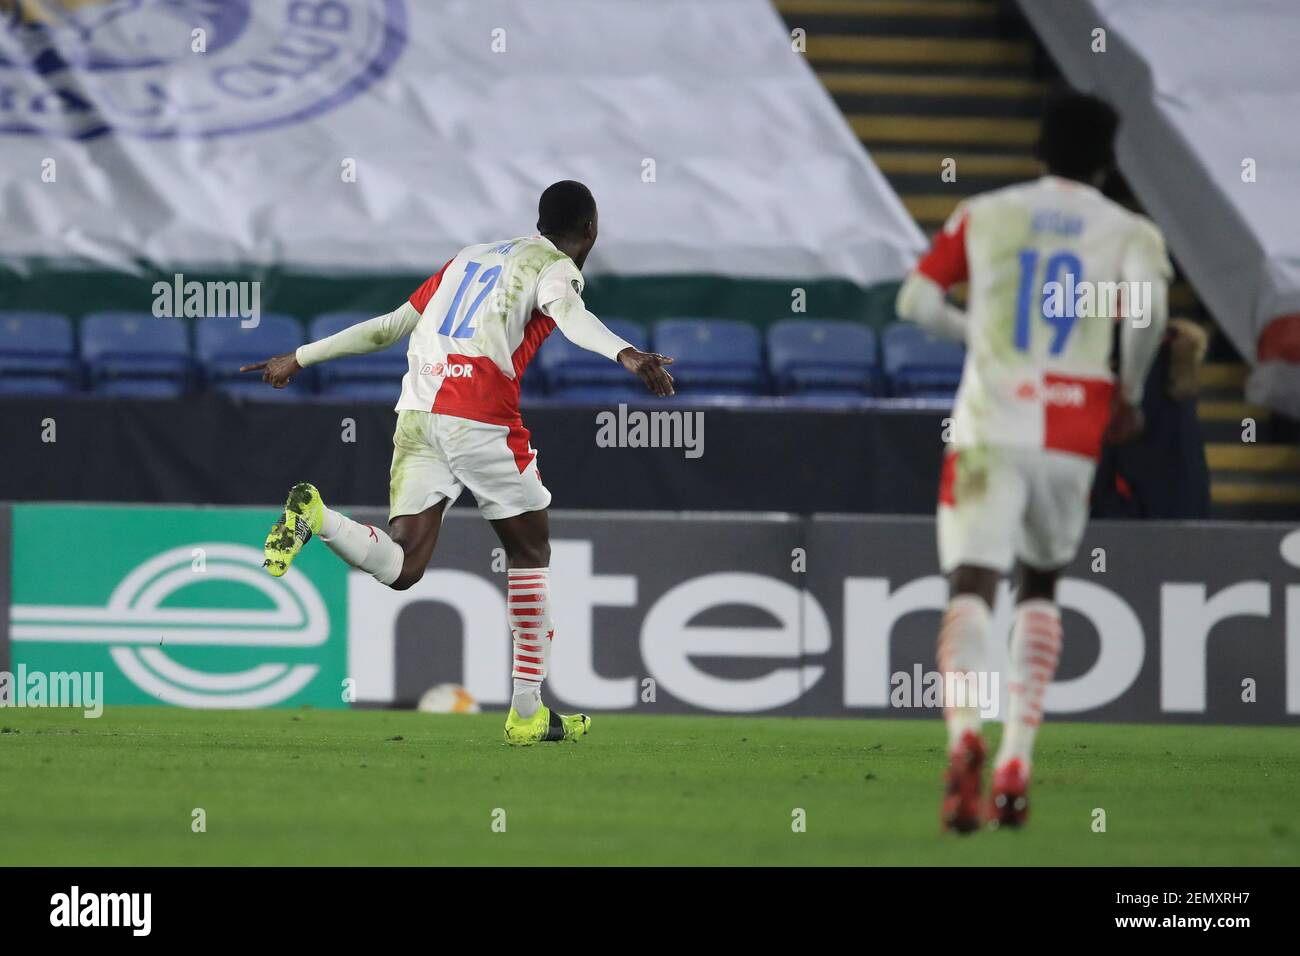 Leicester, UK. 25th Feb, 2021: Abdallah Sima (12) of Slavia Prague celebrates making it 0-2 in, on 2/25/2021. (Photo by Mark Cosgrove/News Images/Sipa USA) Credit: Sipa USA/Alamy Live News Stock Photo